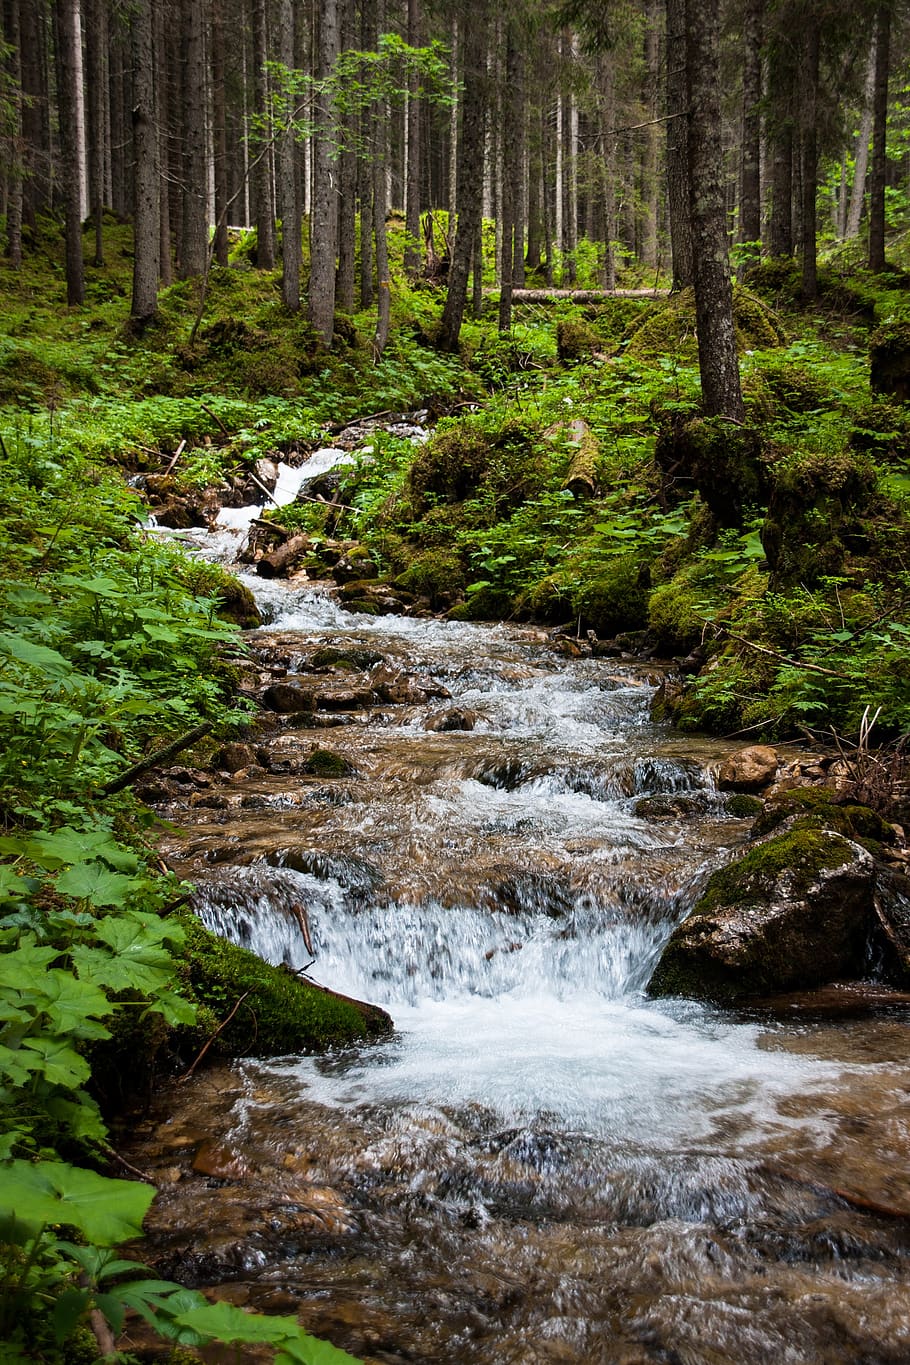 bach, watercourse, creek, forest, water, nature, landscape, waters, moss, trees